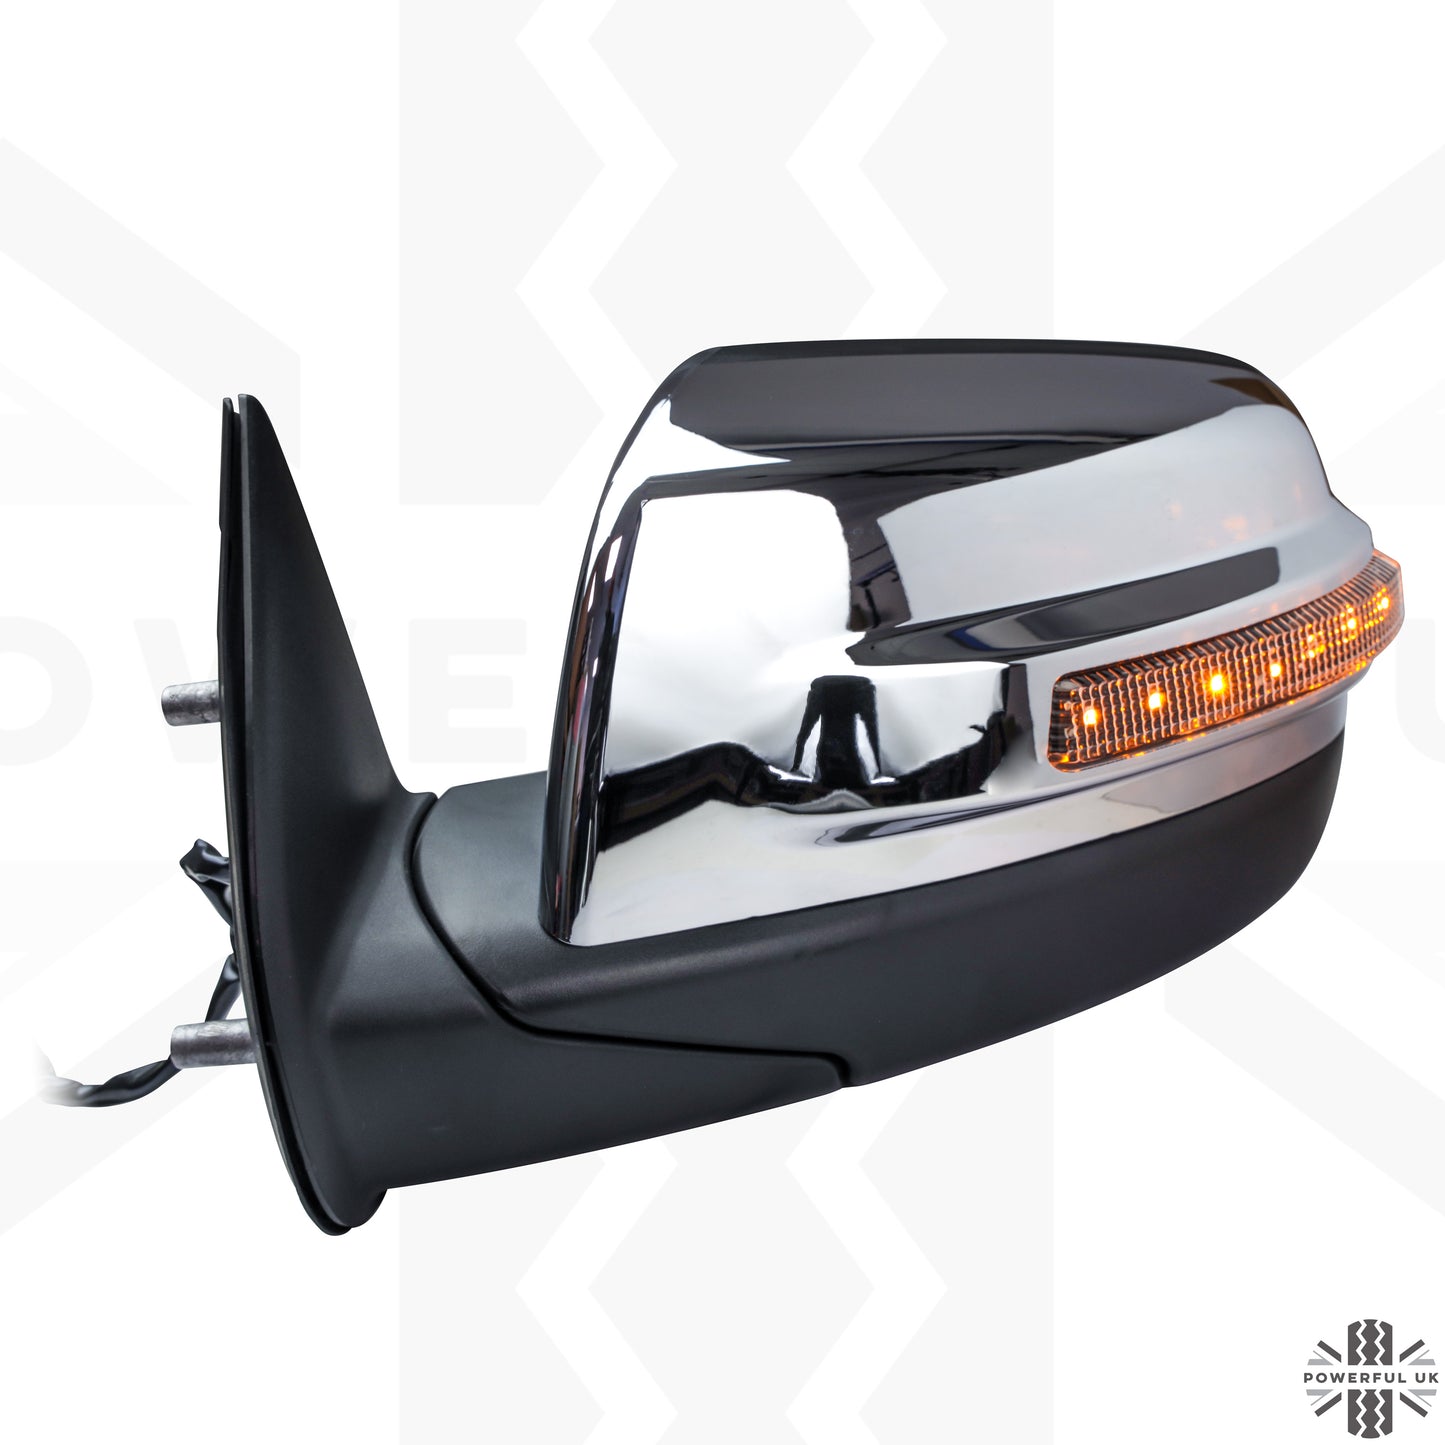 Wing Mirror with LED inicator for Ford Ranger 2006-11 - Left